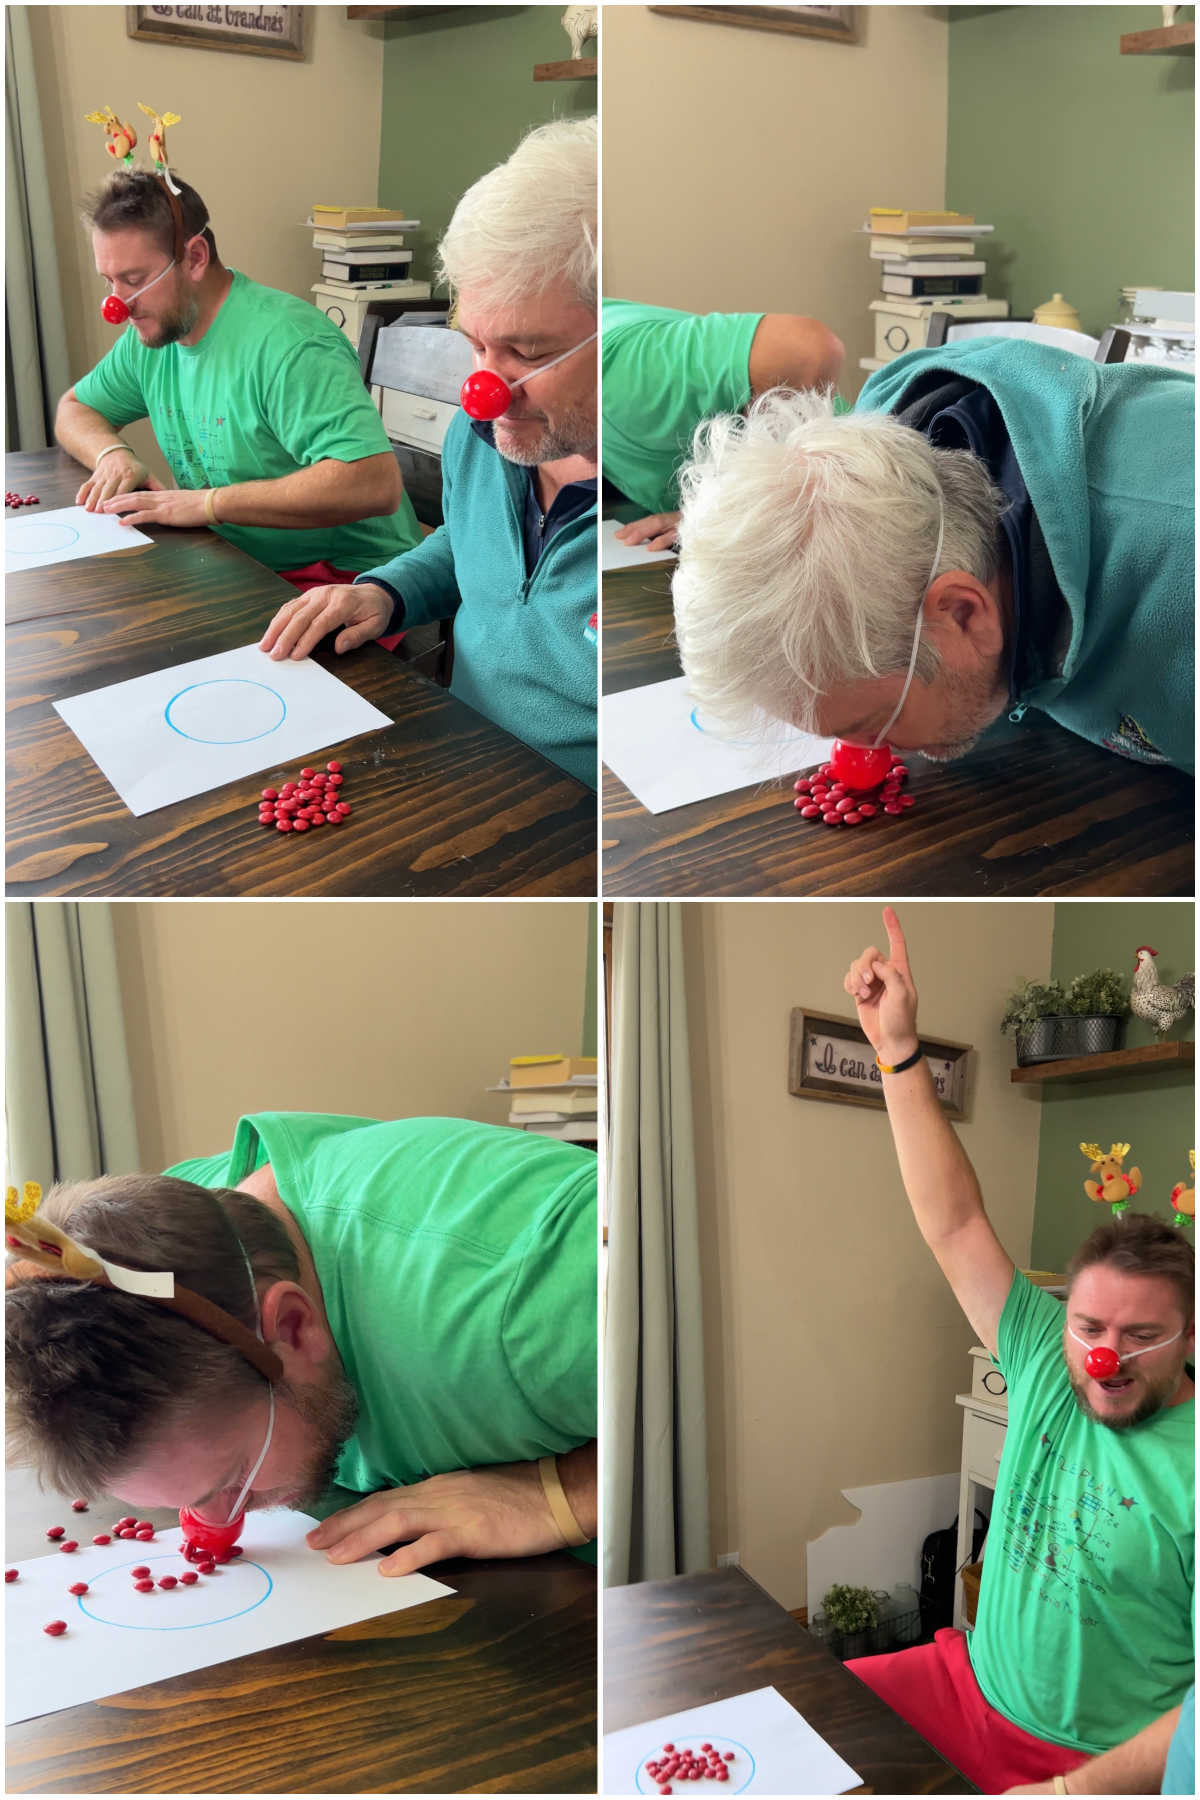 two men moving red M&Ms with their noses